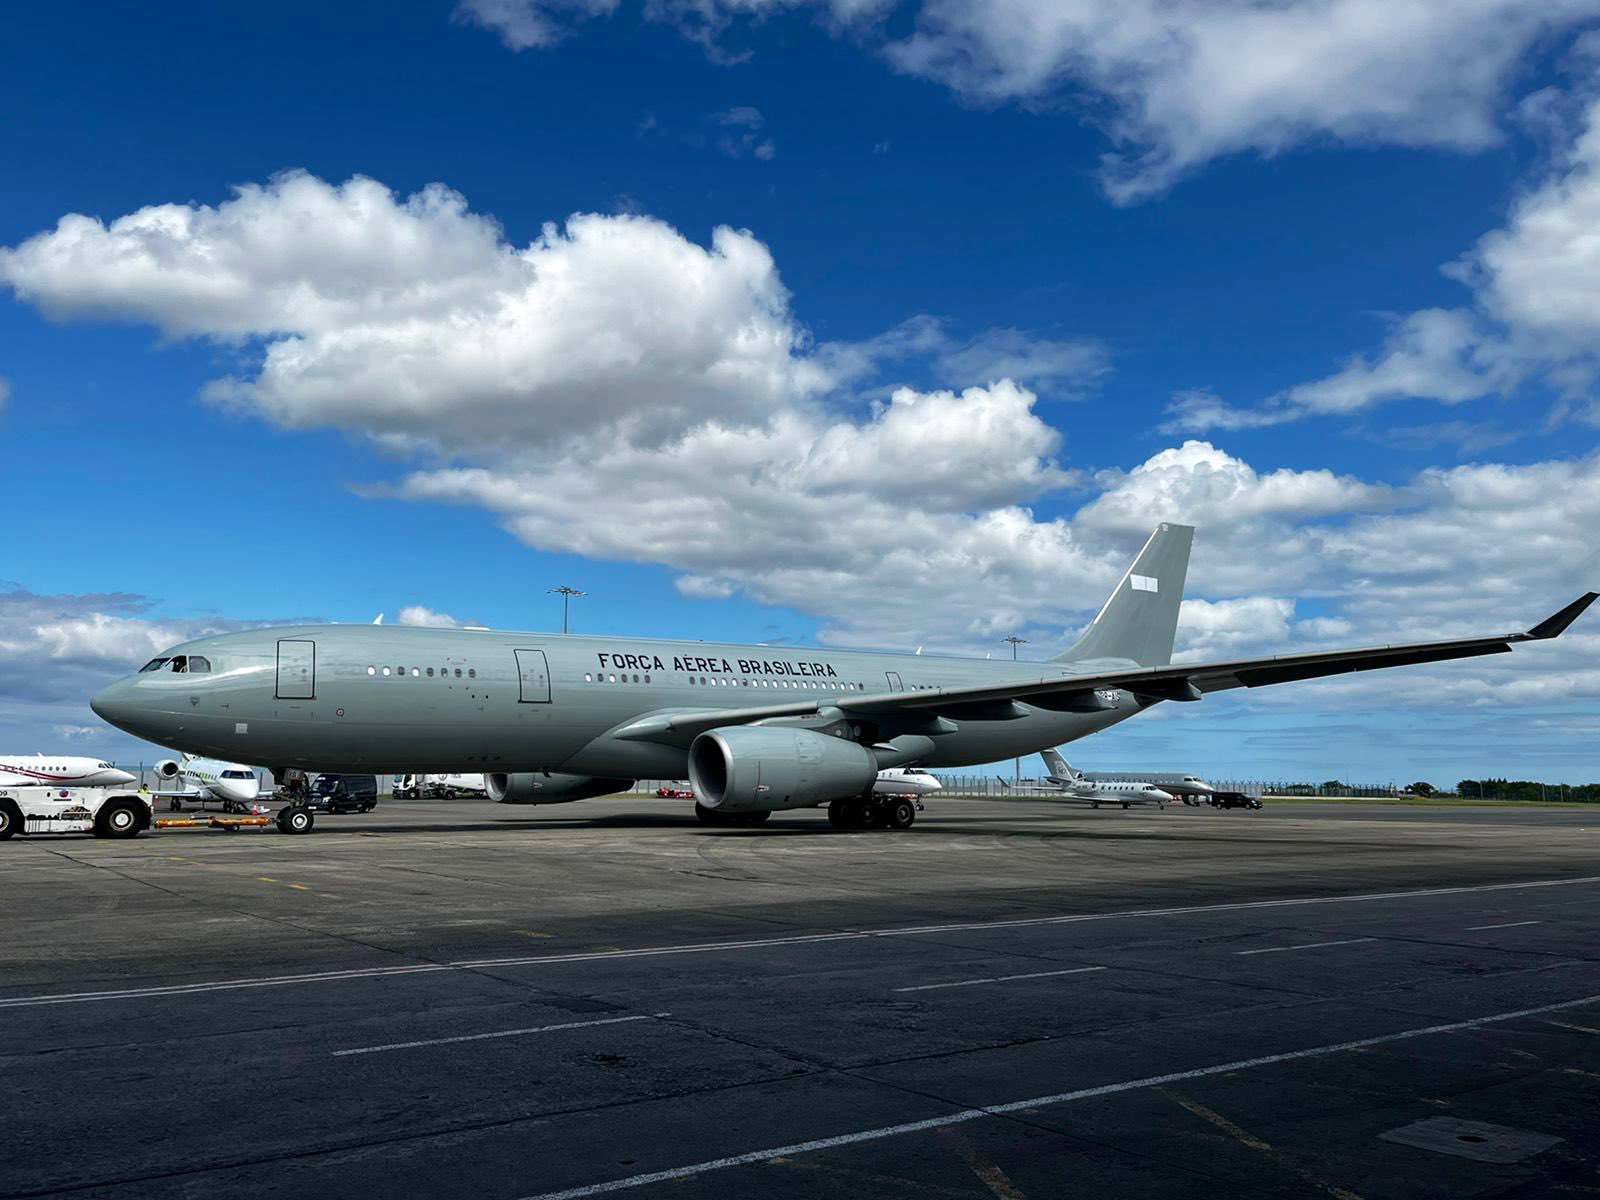 First FAB KC-30 arrives in Brazil this month